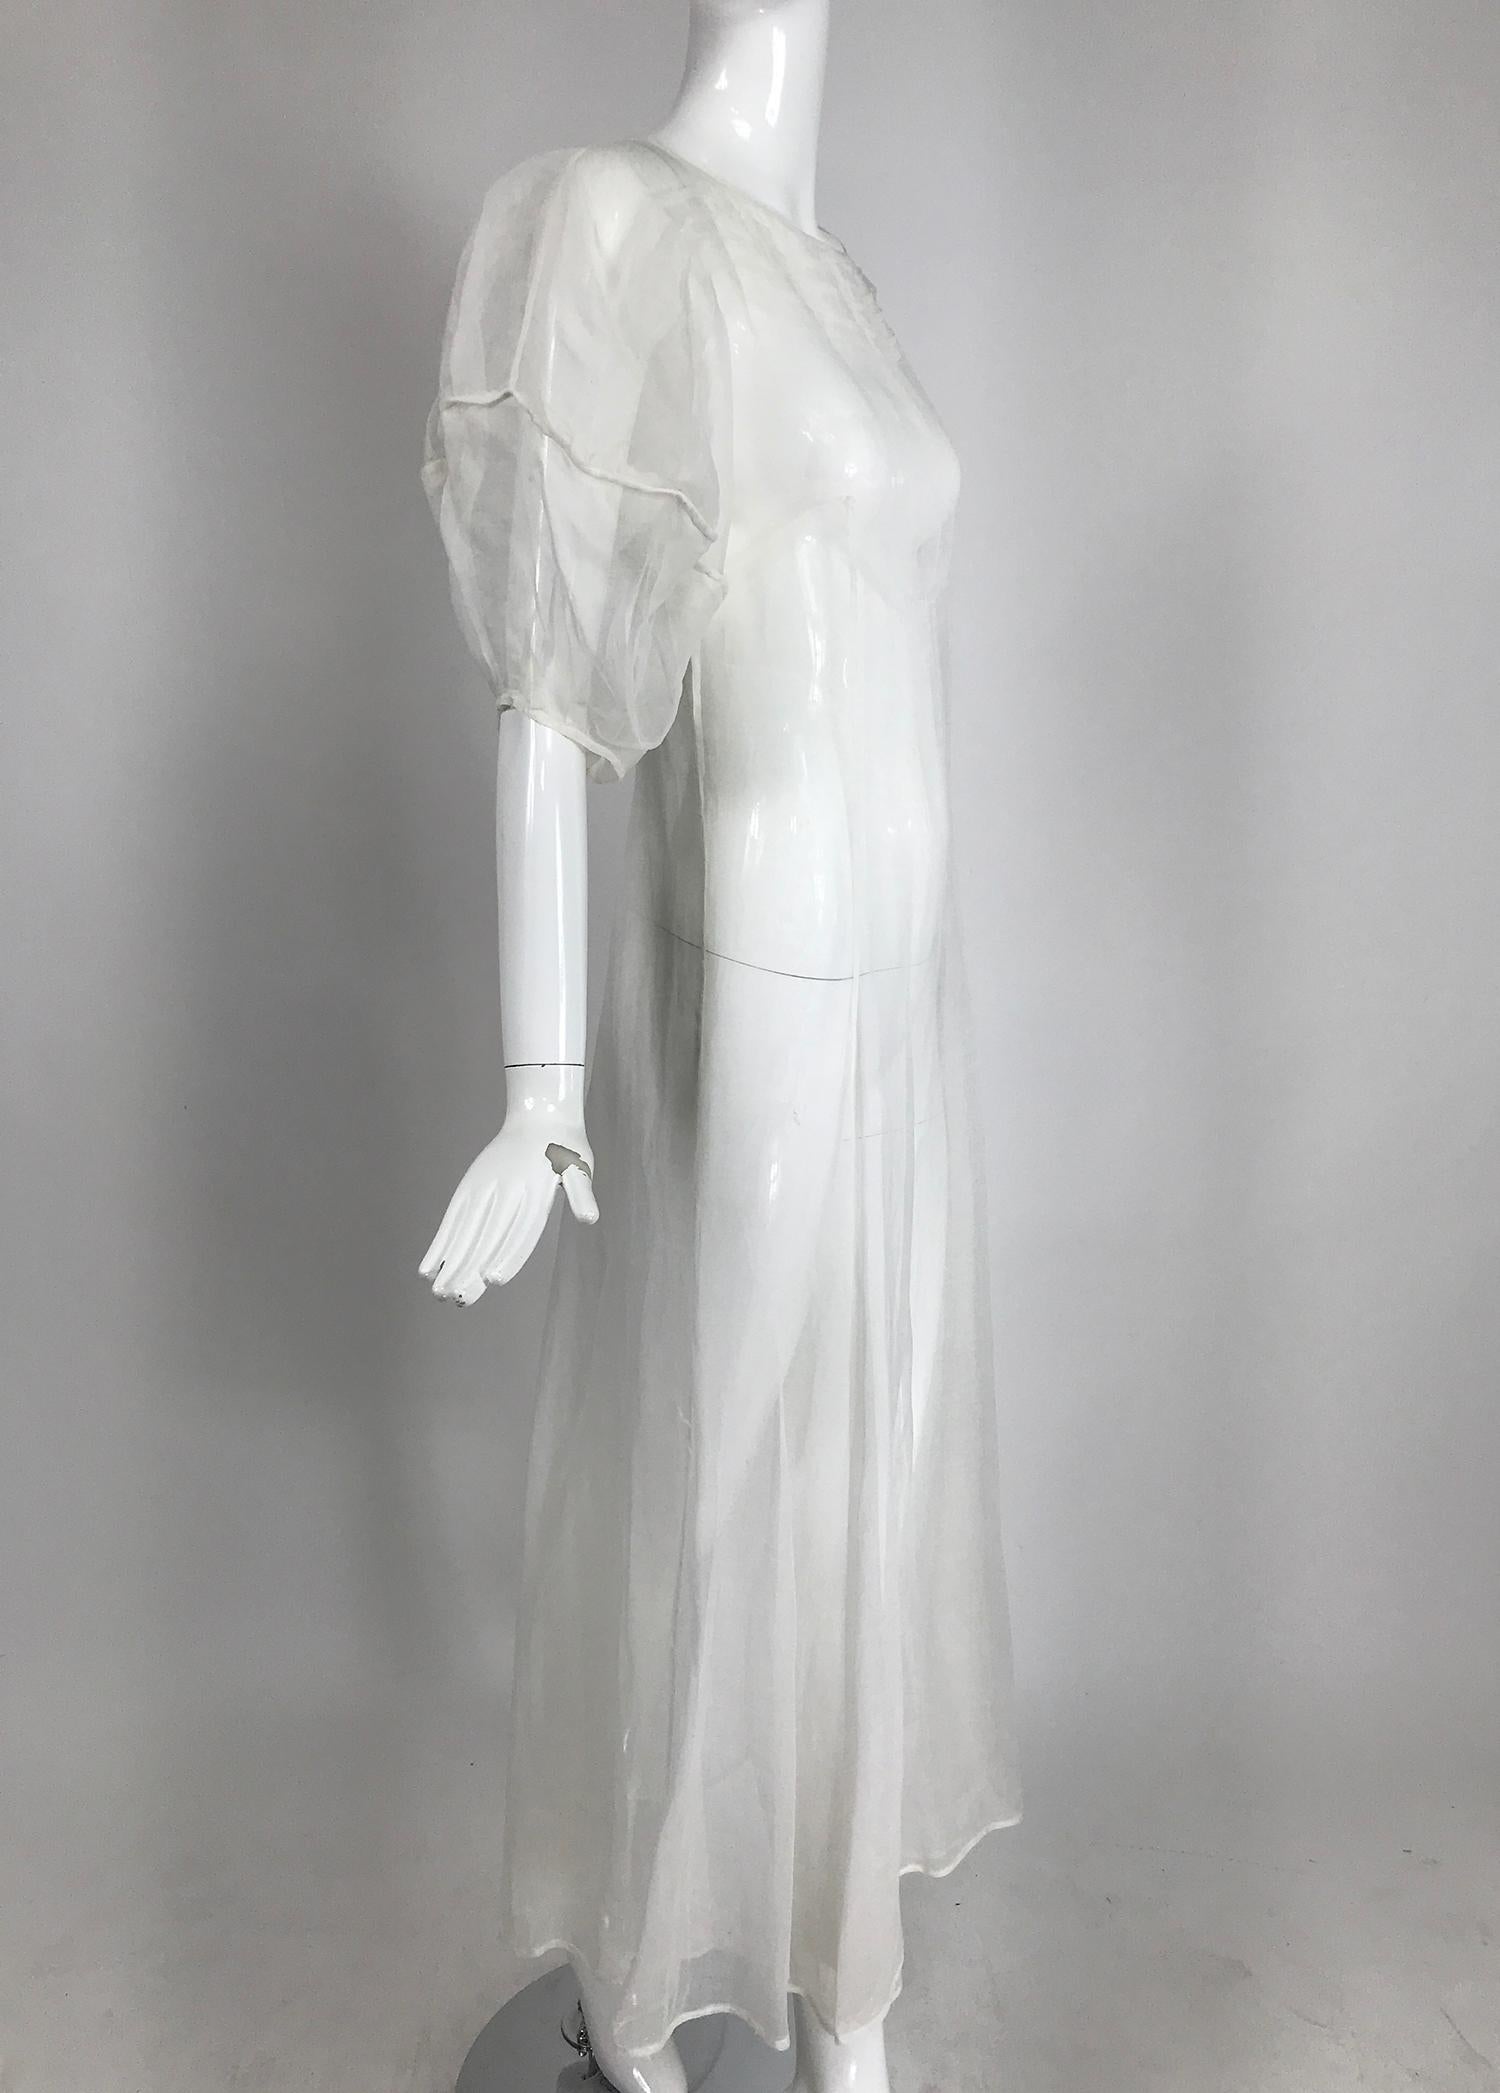     1930s Sheer white organza, lantern sleeve, gored skirt maxi dress, handmade. This beautiful dress is in amazing condition, from the 1930s it was handmade by an accomplished seamstress. It would make a lovely wedding dress. 
    The dress slips